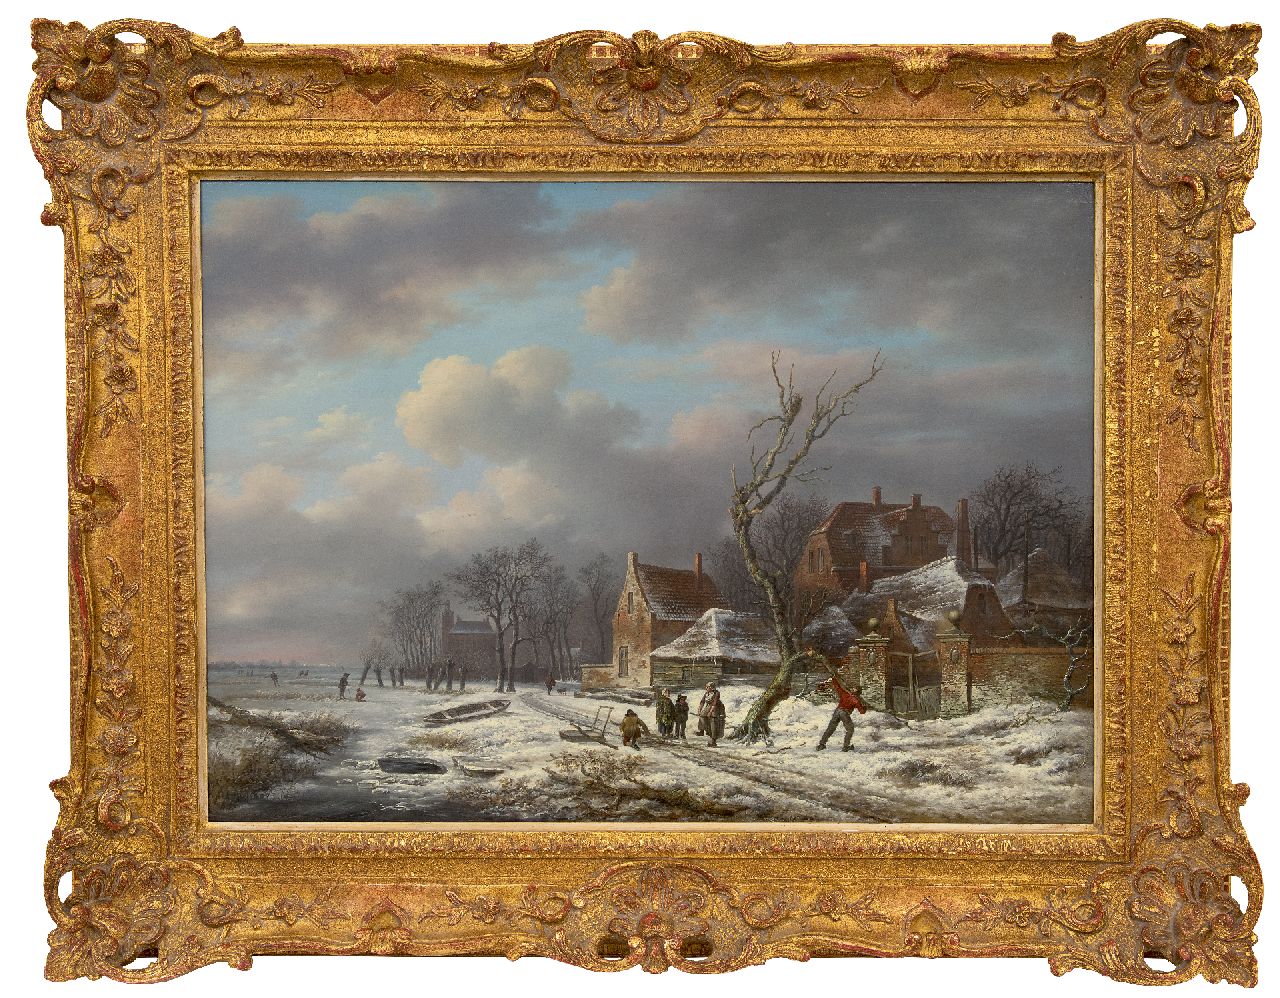 Schelfhout A.  | Andreas Schelfhout | Paintings offered for sale | Gathering wood in winter (pendant of Summer landscape), oil on panel 53.0 x 72.6 cm, signed with traces of signature l.r. and painted circa 1815